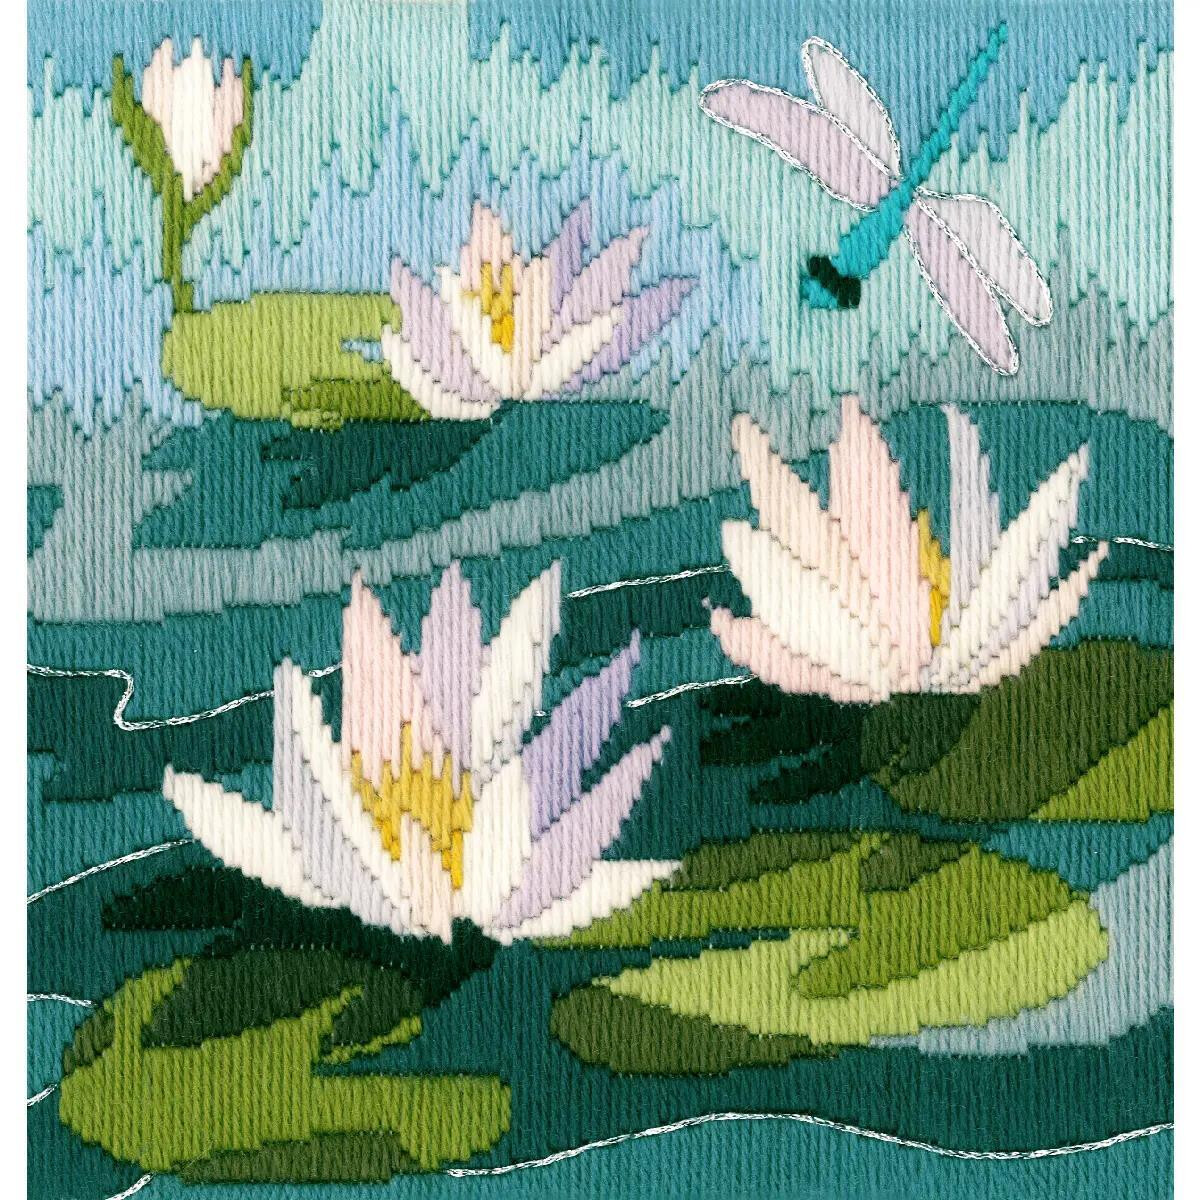 Hand-stitched embroidery (embroidery picture) with a calm...